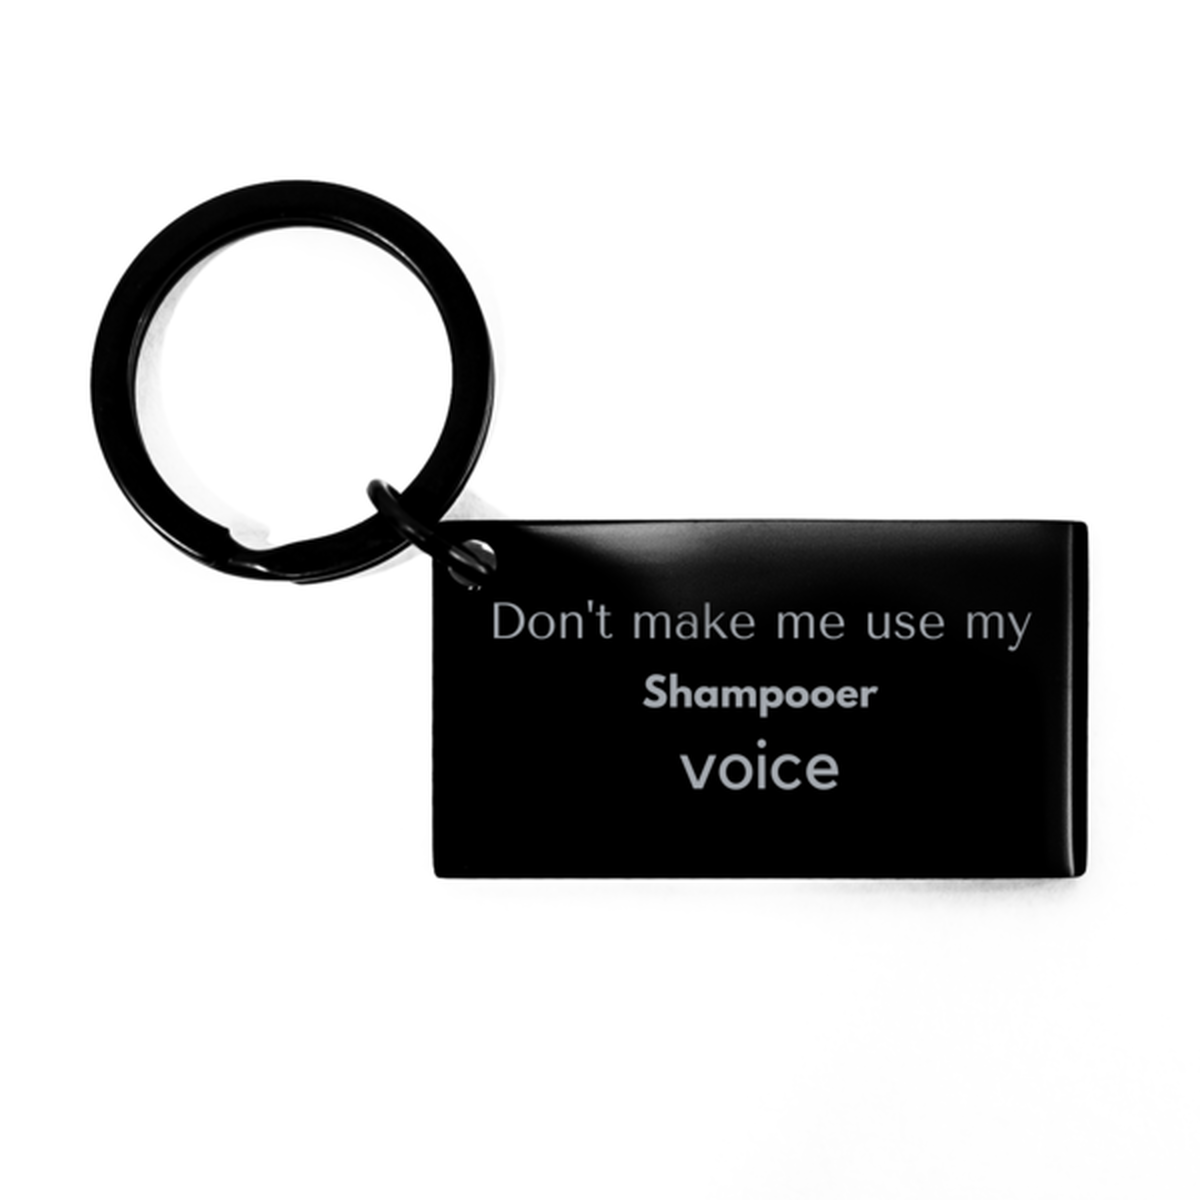 Don't make me use my Shampooer voice, Sarcasm Shampooer Gifts, Christmas Shampooer Keychain Birthday Unique Gifts For Shampooer Coworkers, Men, Women, Colleague, Friends